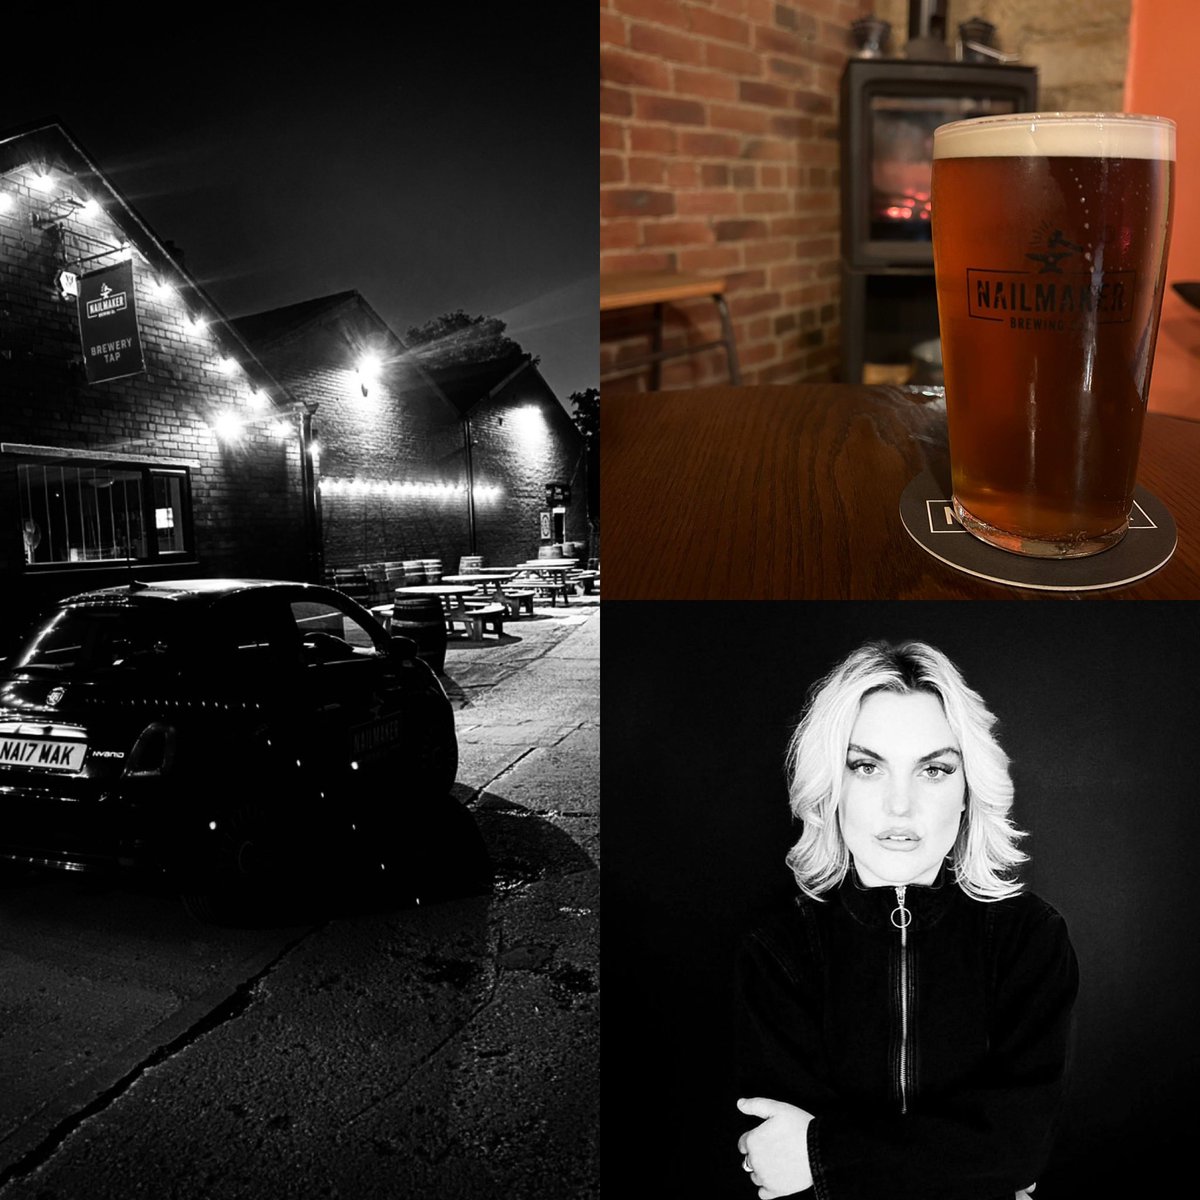 That’s a wrap for this evening 🍺❤️ We are back tomorrow at 10am with a shop full of Valentine gifts 🎁❤️ & takeaway supplies. The super talented Izzy Watson will be singing from 3pm. Join us for a lovely chilled Saturday session. 🎤🍺🎵🎁❤️